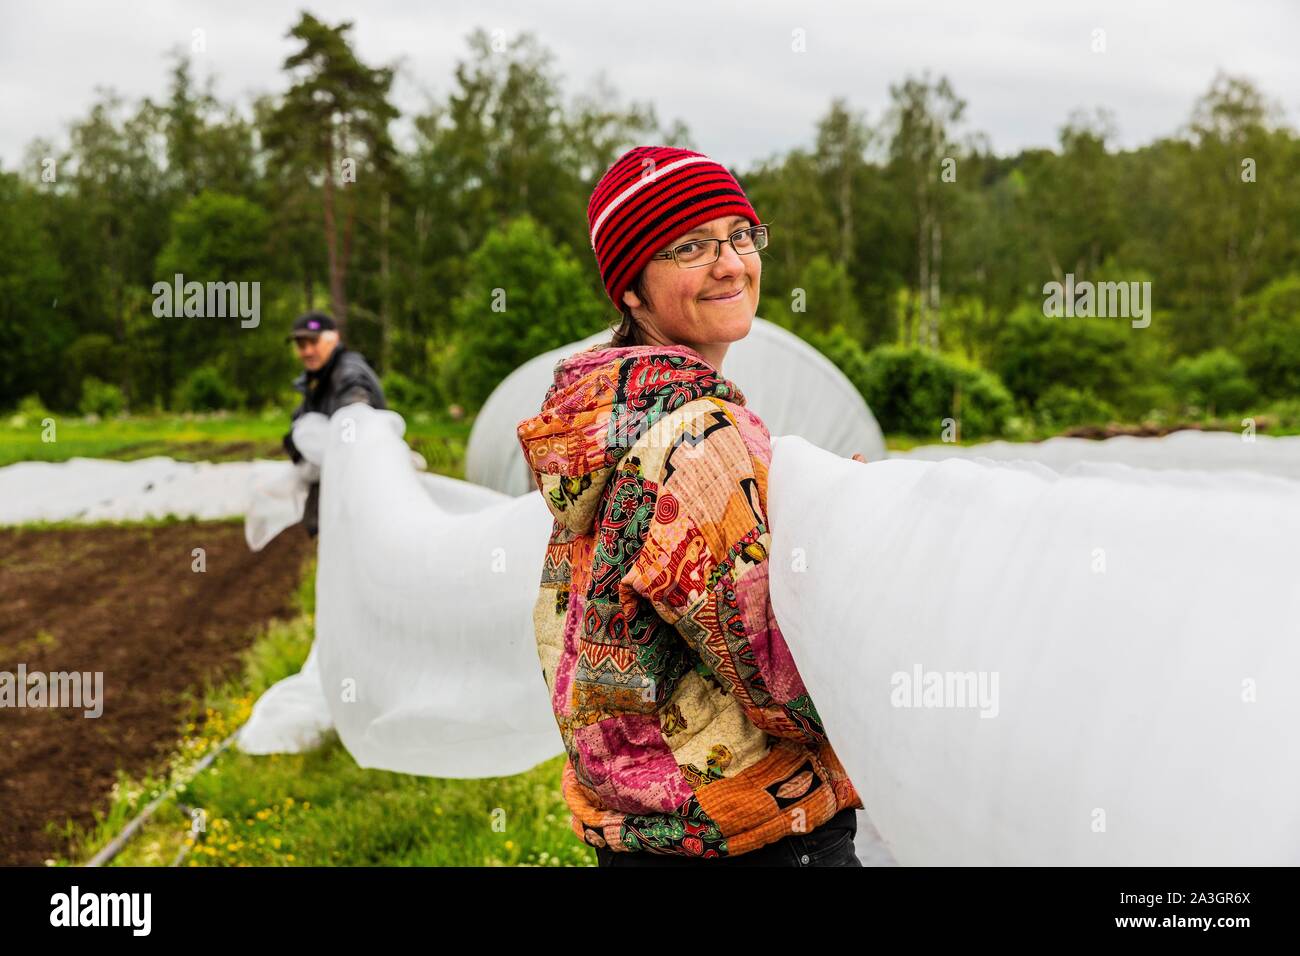 Sweden, County of Vastra Gotaland, Hokerum, Ulricehamn hamlet, Rochat family report, immediate protection with a protective veil after planting cabbages Stock Photo